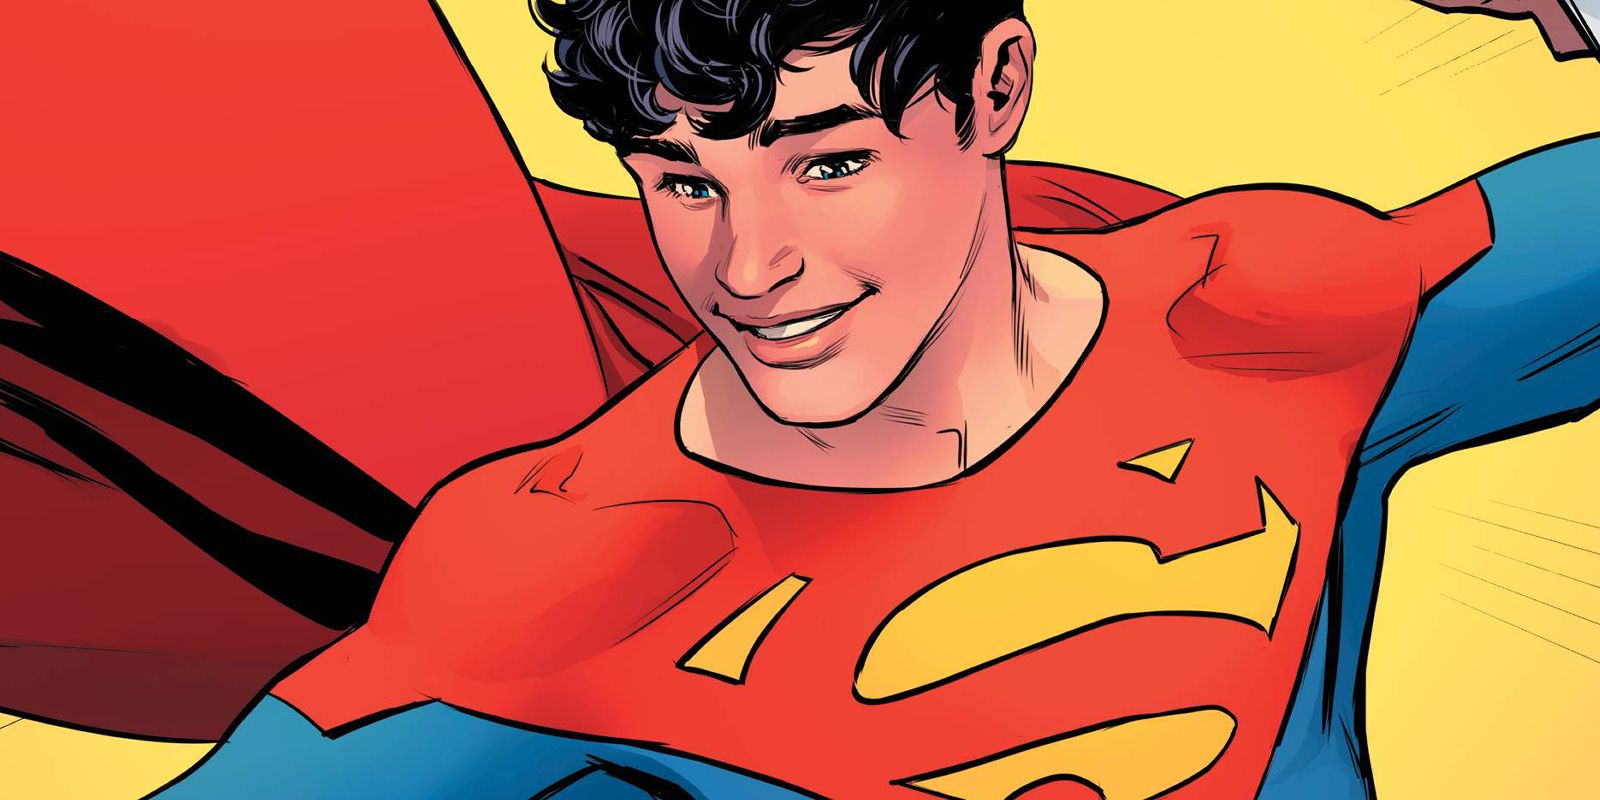 Superman Son of Kal-El #14 from DC Comics with Jon Kent as Superman smiling